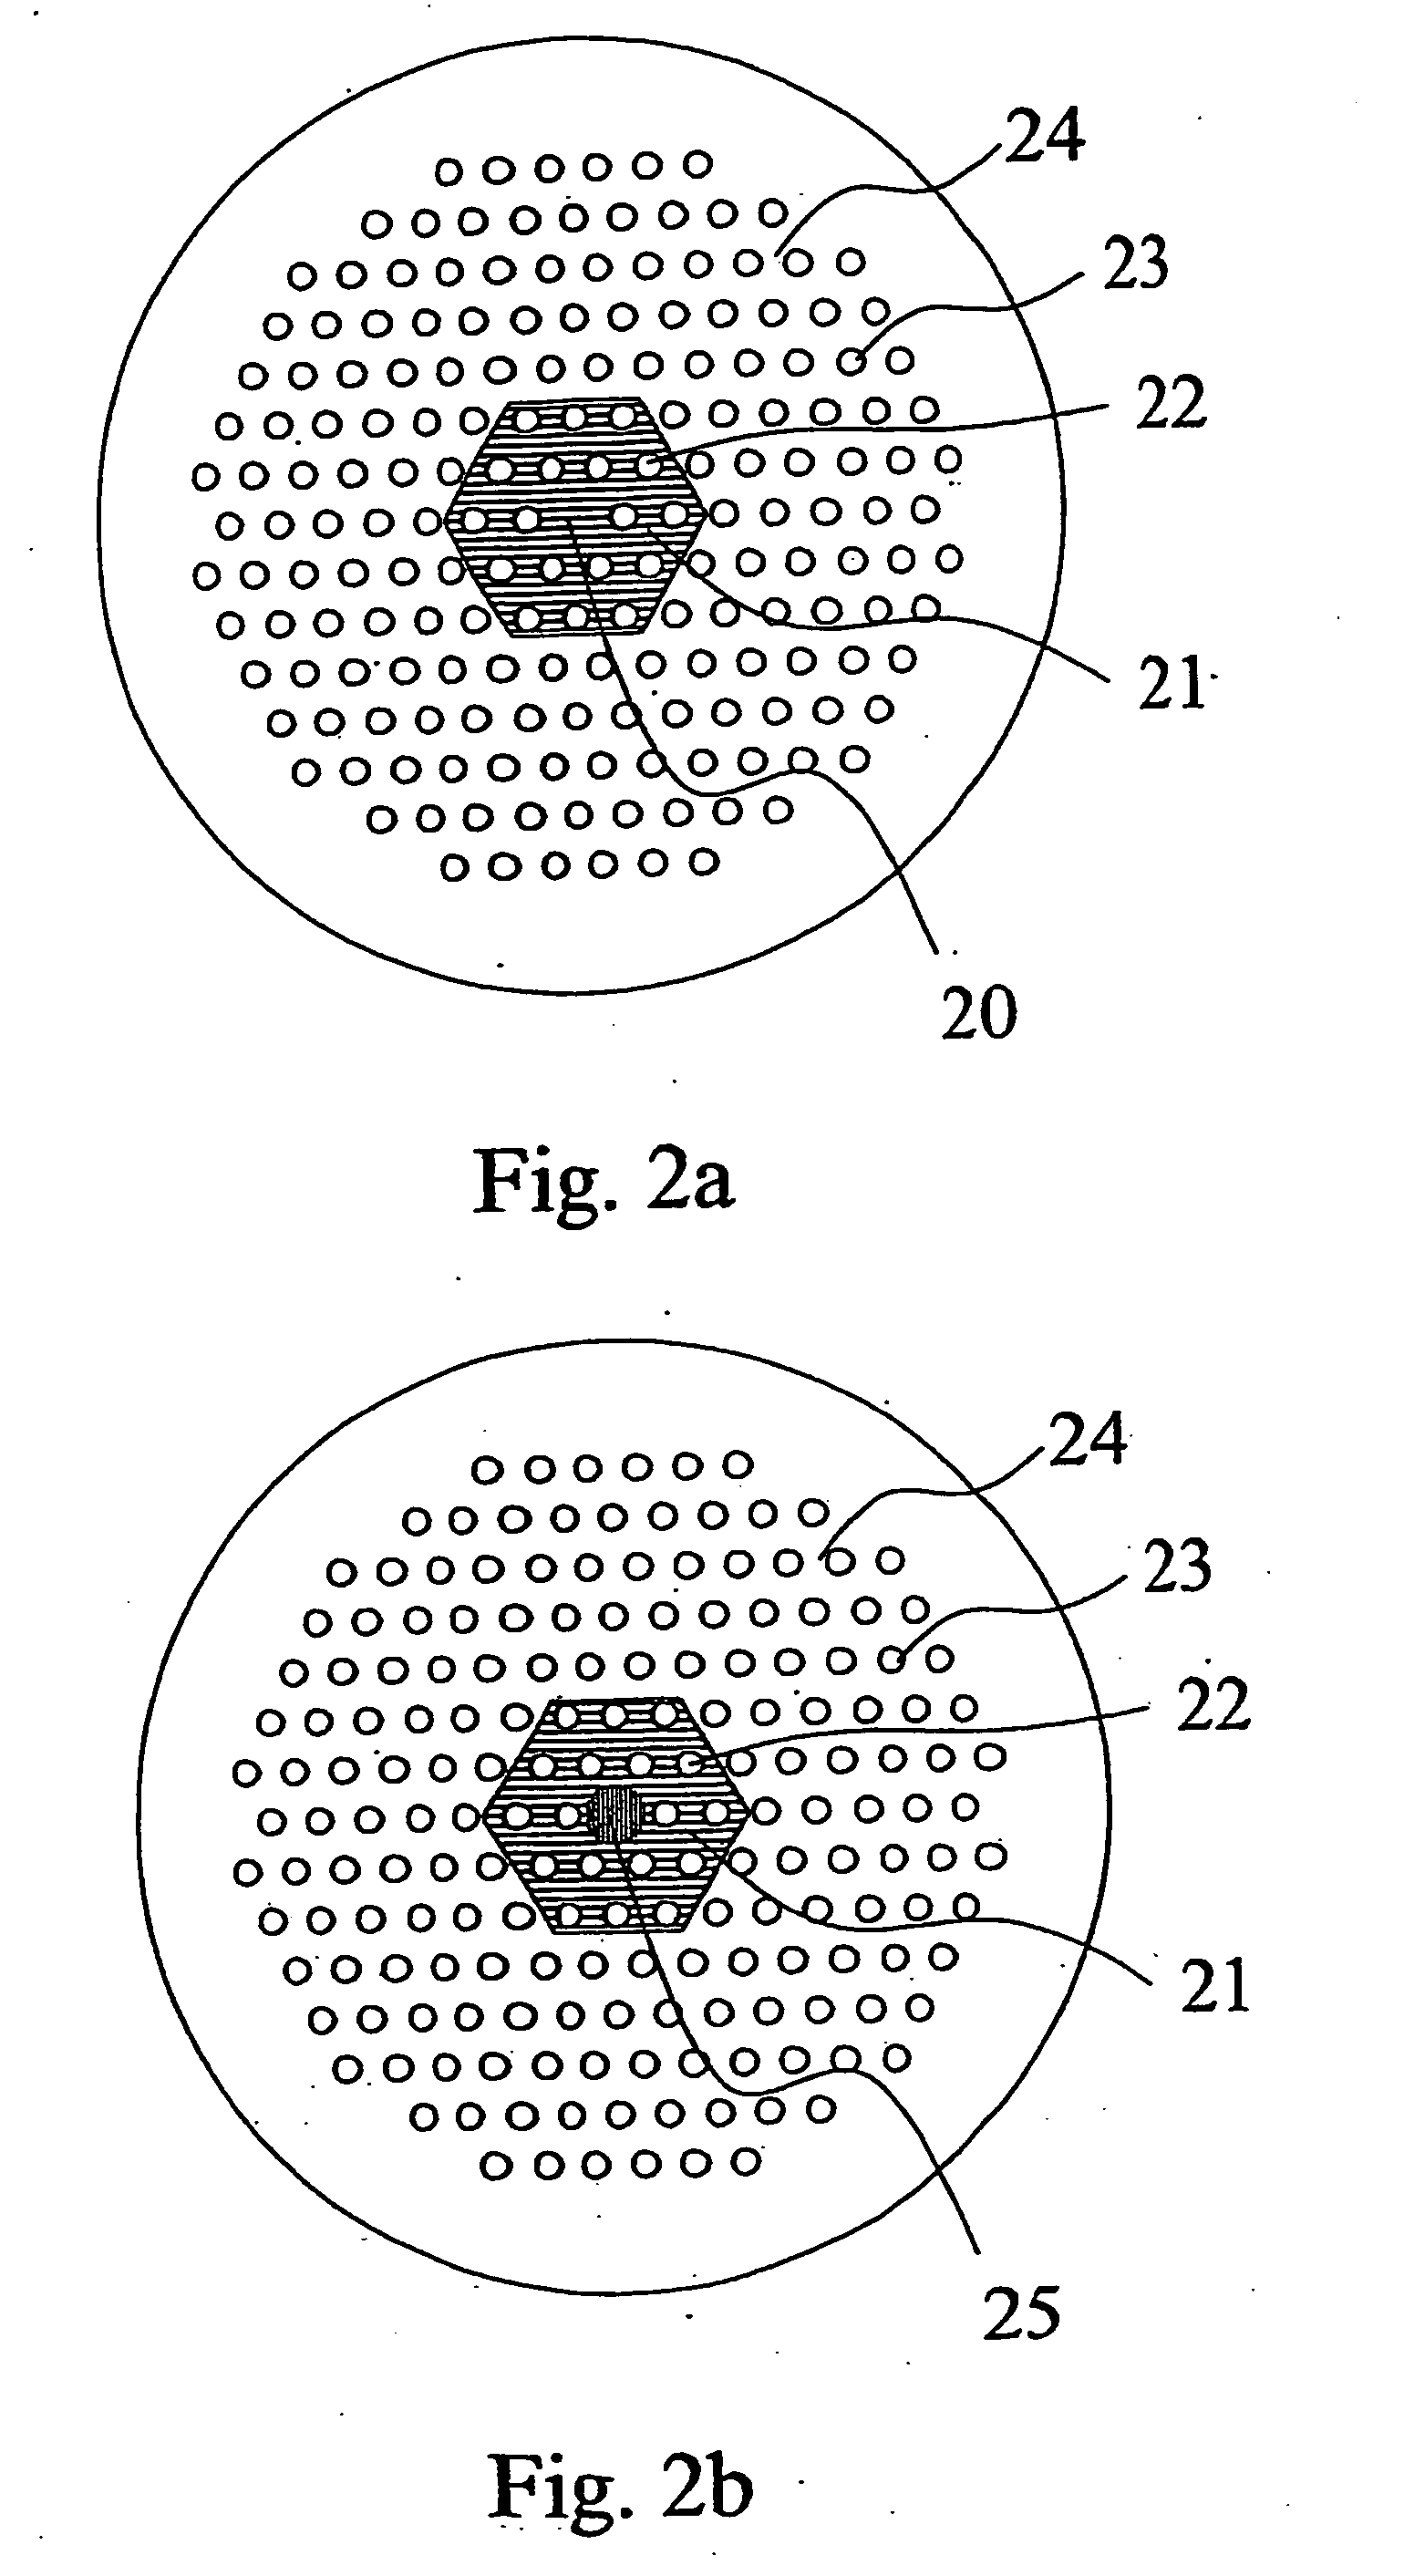 Splicing and connectorization of photonic crystal fibers